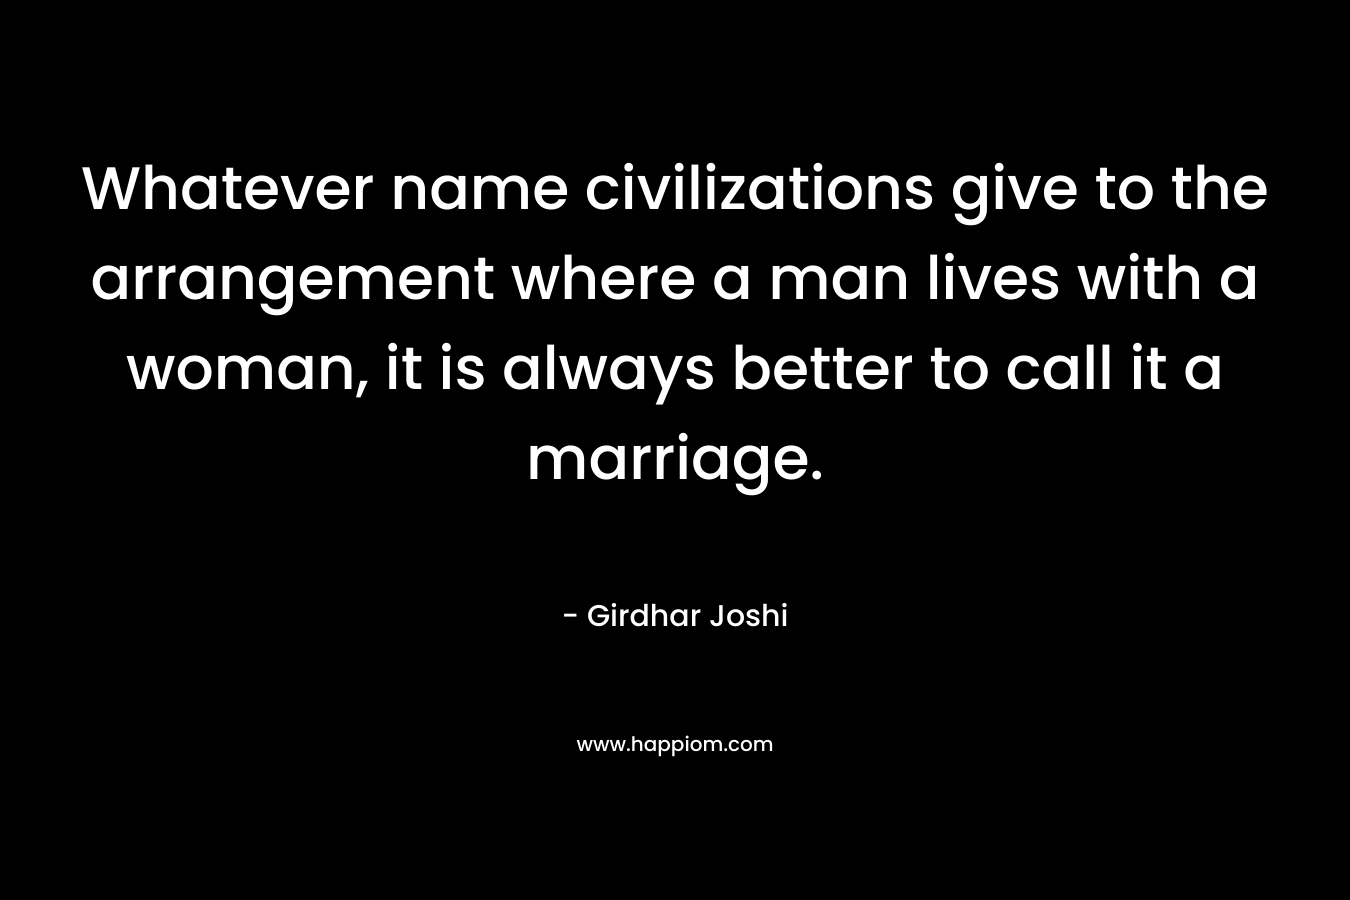 Whatever name civilizations give to the arrangement where a man lives with a woman, it is always better to call it a marriage. – Girdhar Joshi